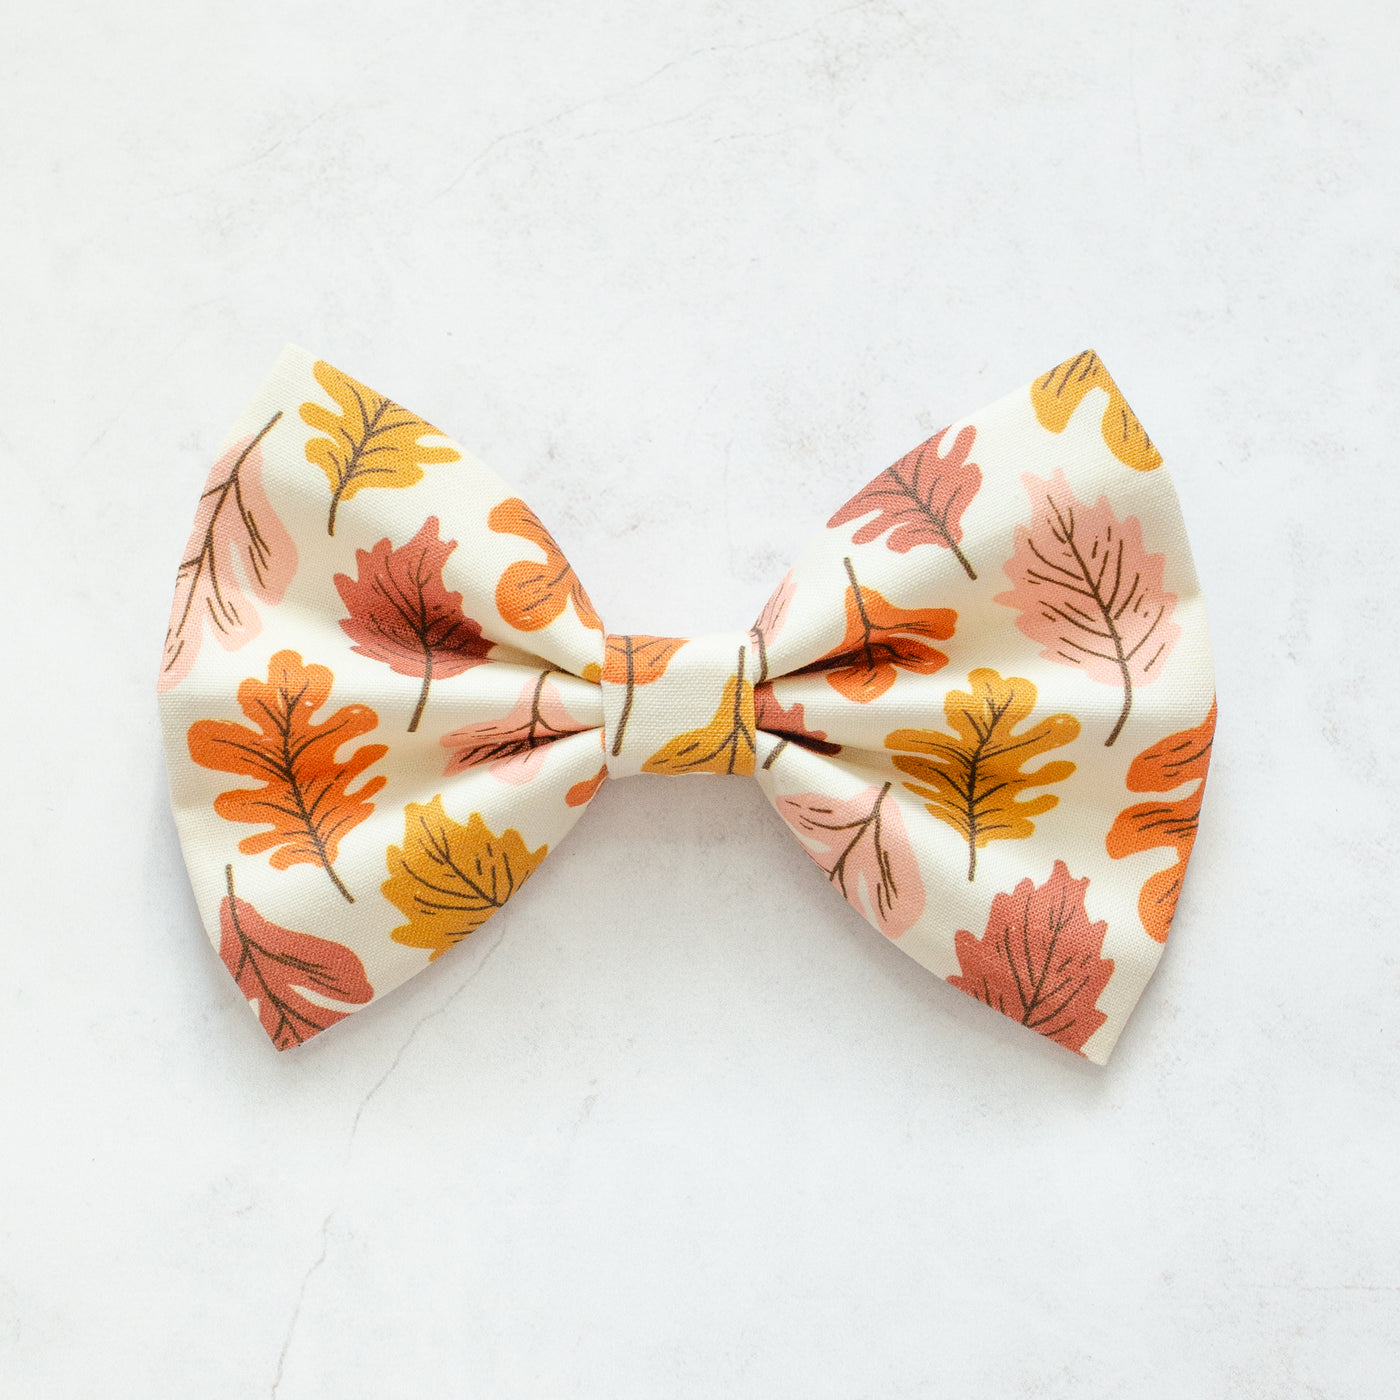 Falling Leaves Bow Tie